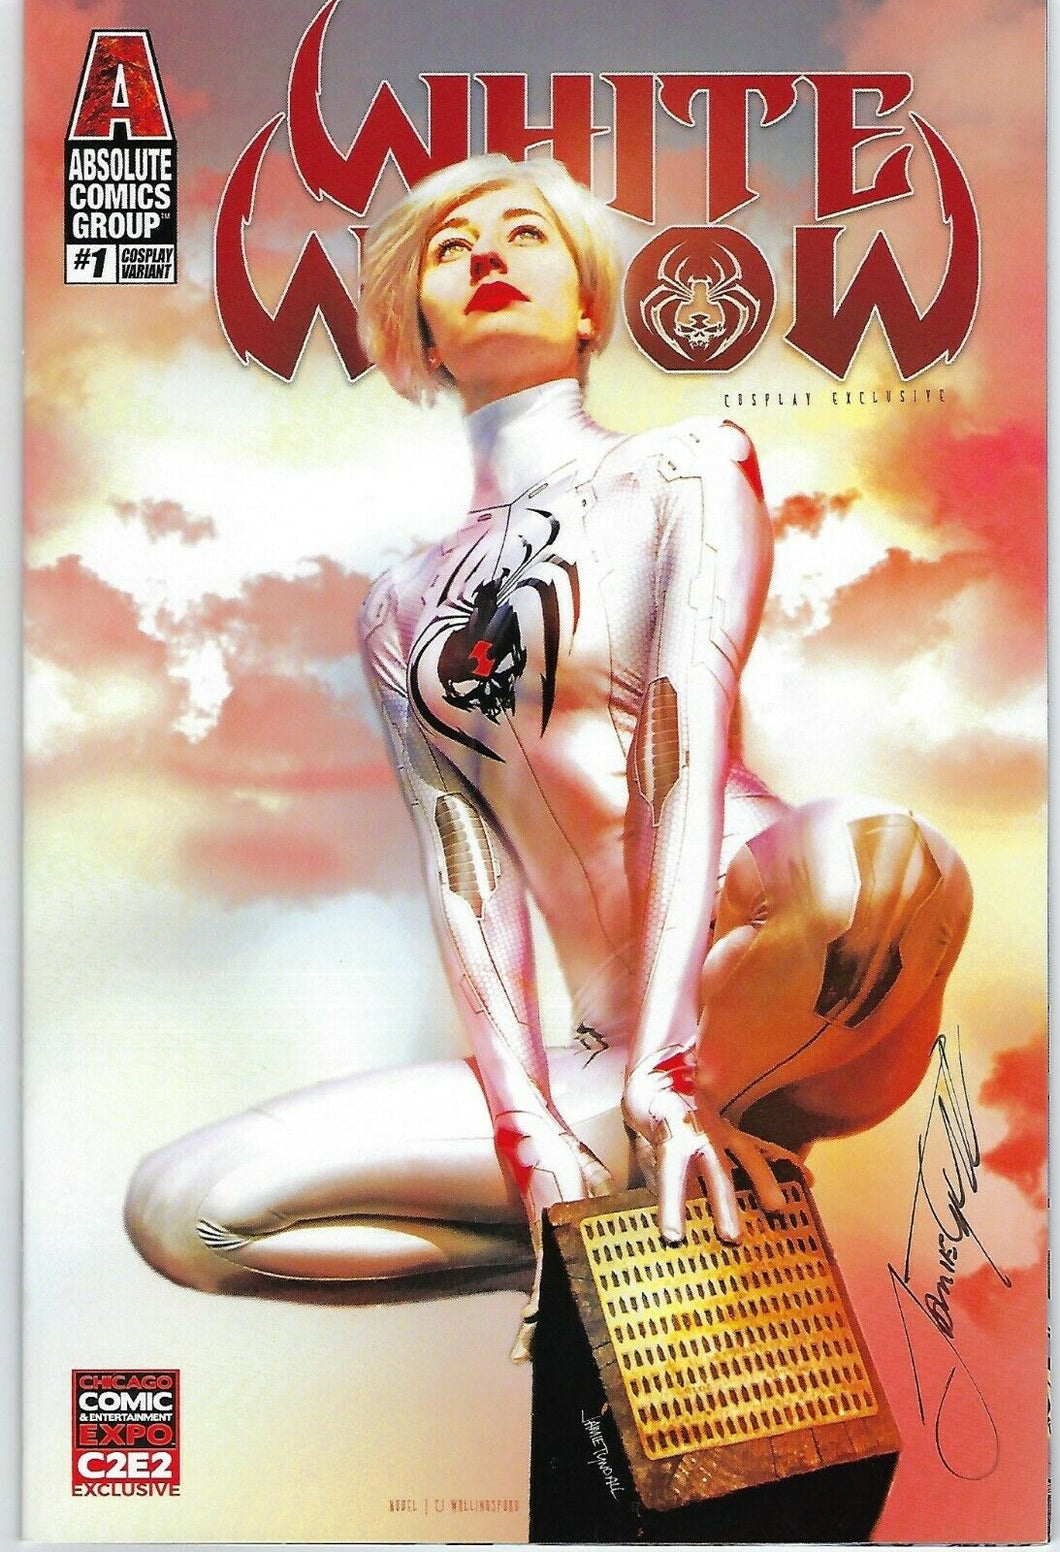 White Widow #1 CJ Cosplay Variant C2E2 Cover Jamie Tyndall Signed Edition   NM